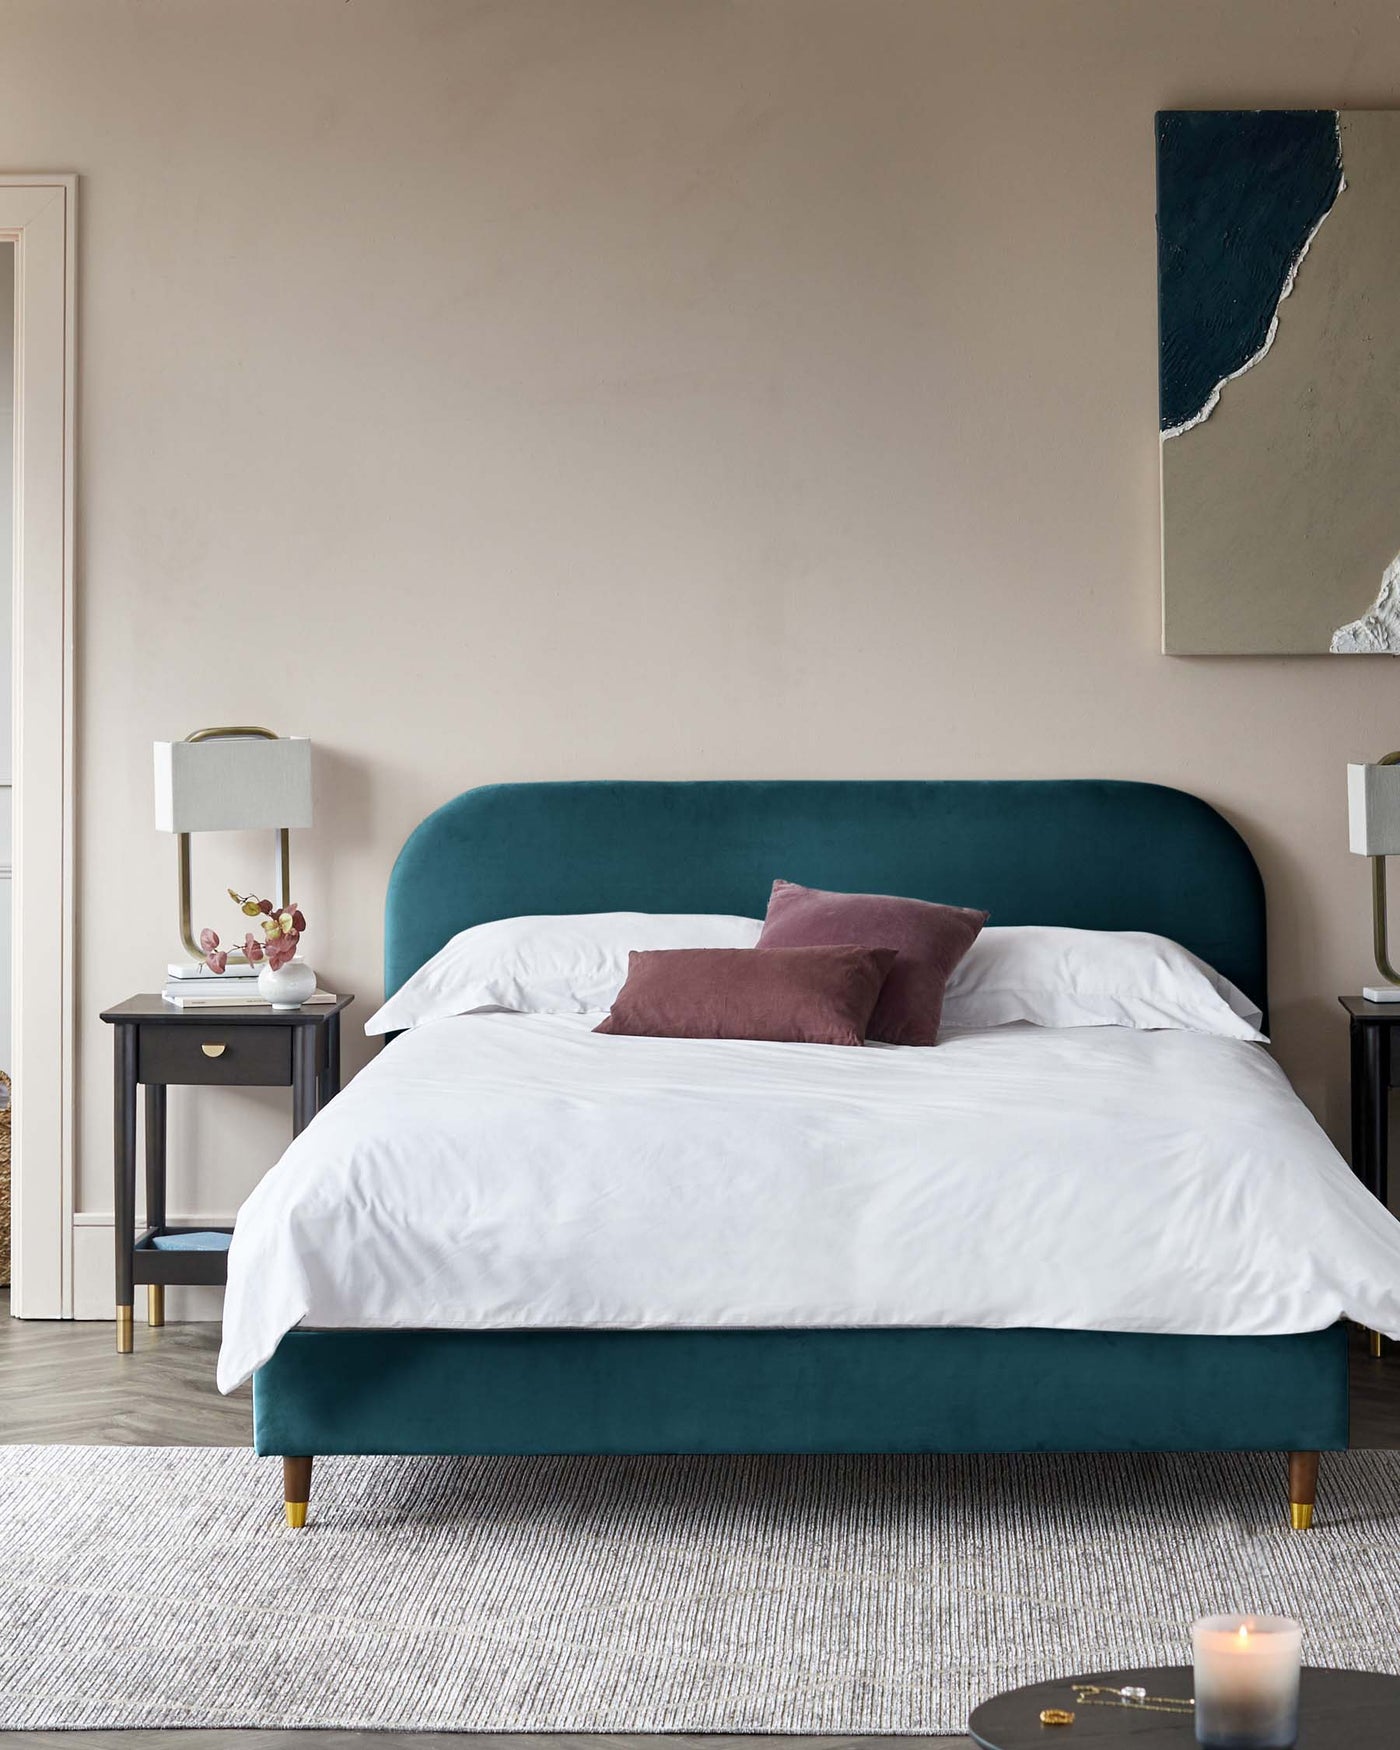 A luxurious teal upholstered bed with a curved headboard and brass-capped legs, flanked by two navy blue nightstands with brass knobs and a lower shelf, set on a textured off-white area rug. A white lamp with a cylindrical shade rests on one nightstand, and an abstract painting hangs above the bed.